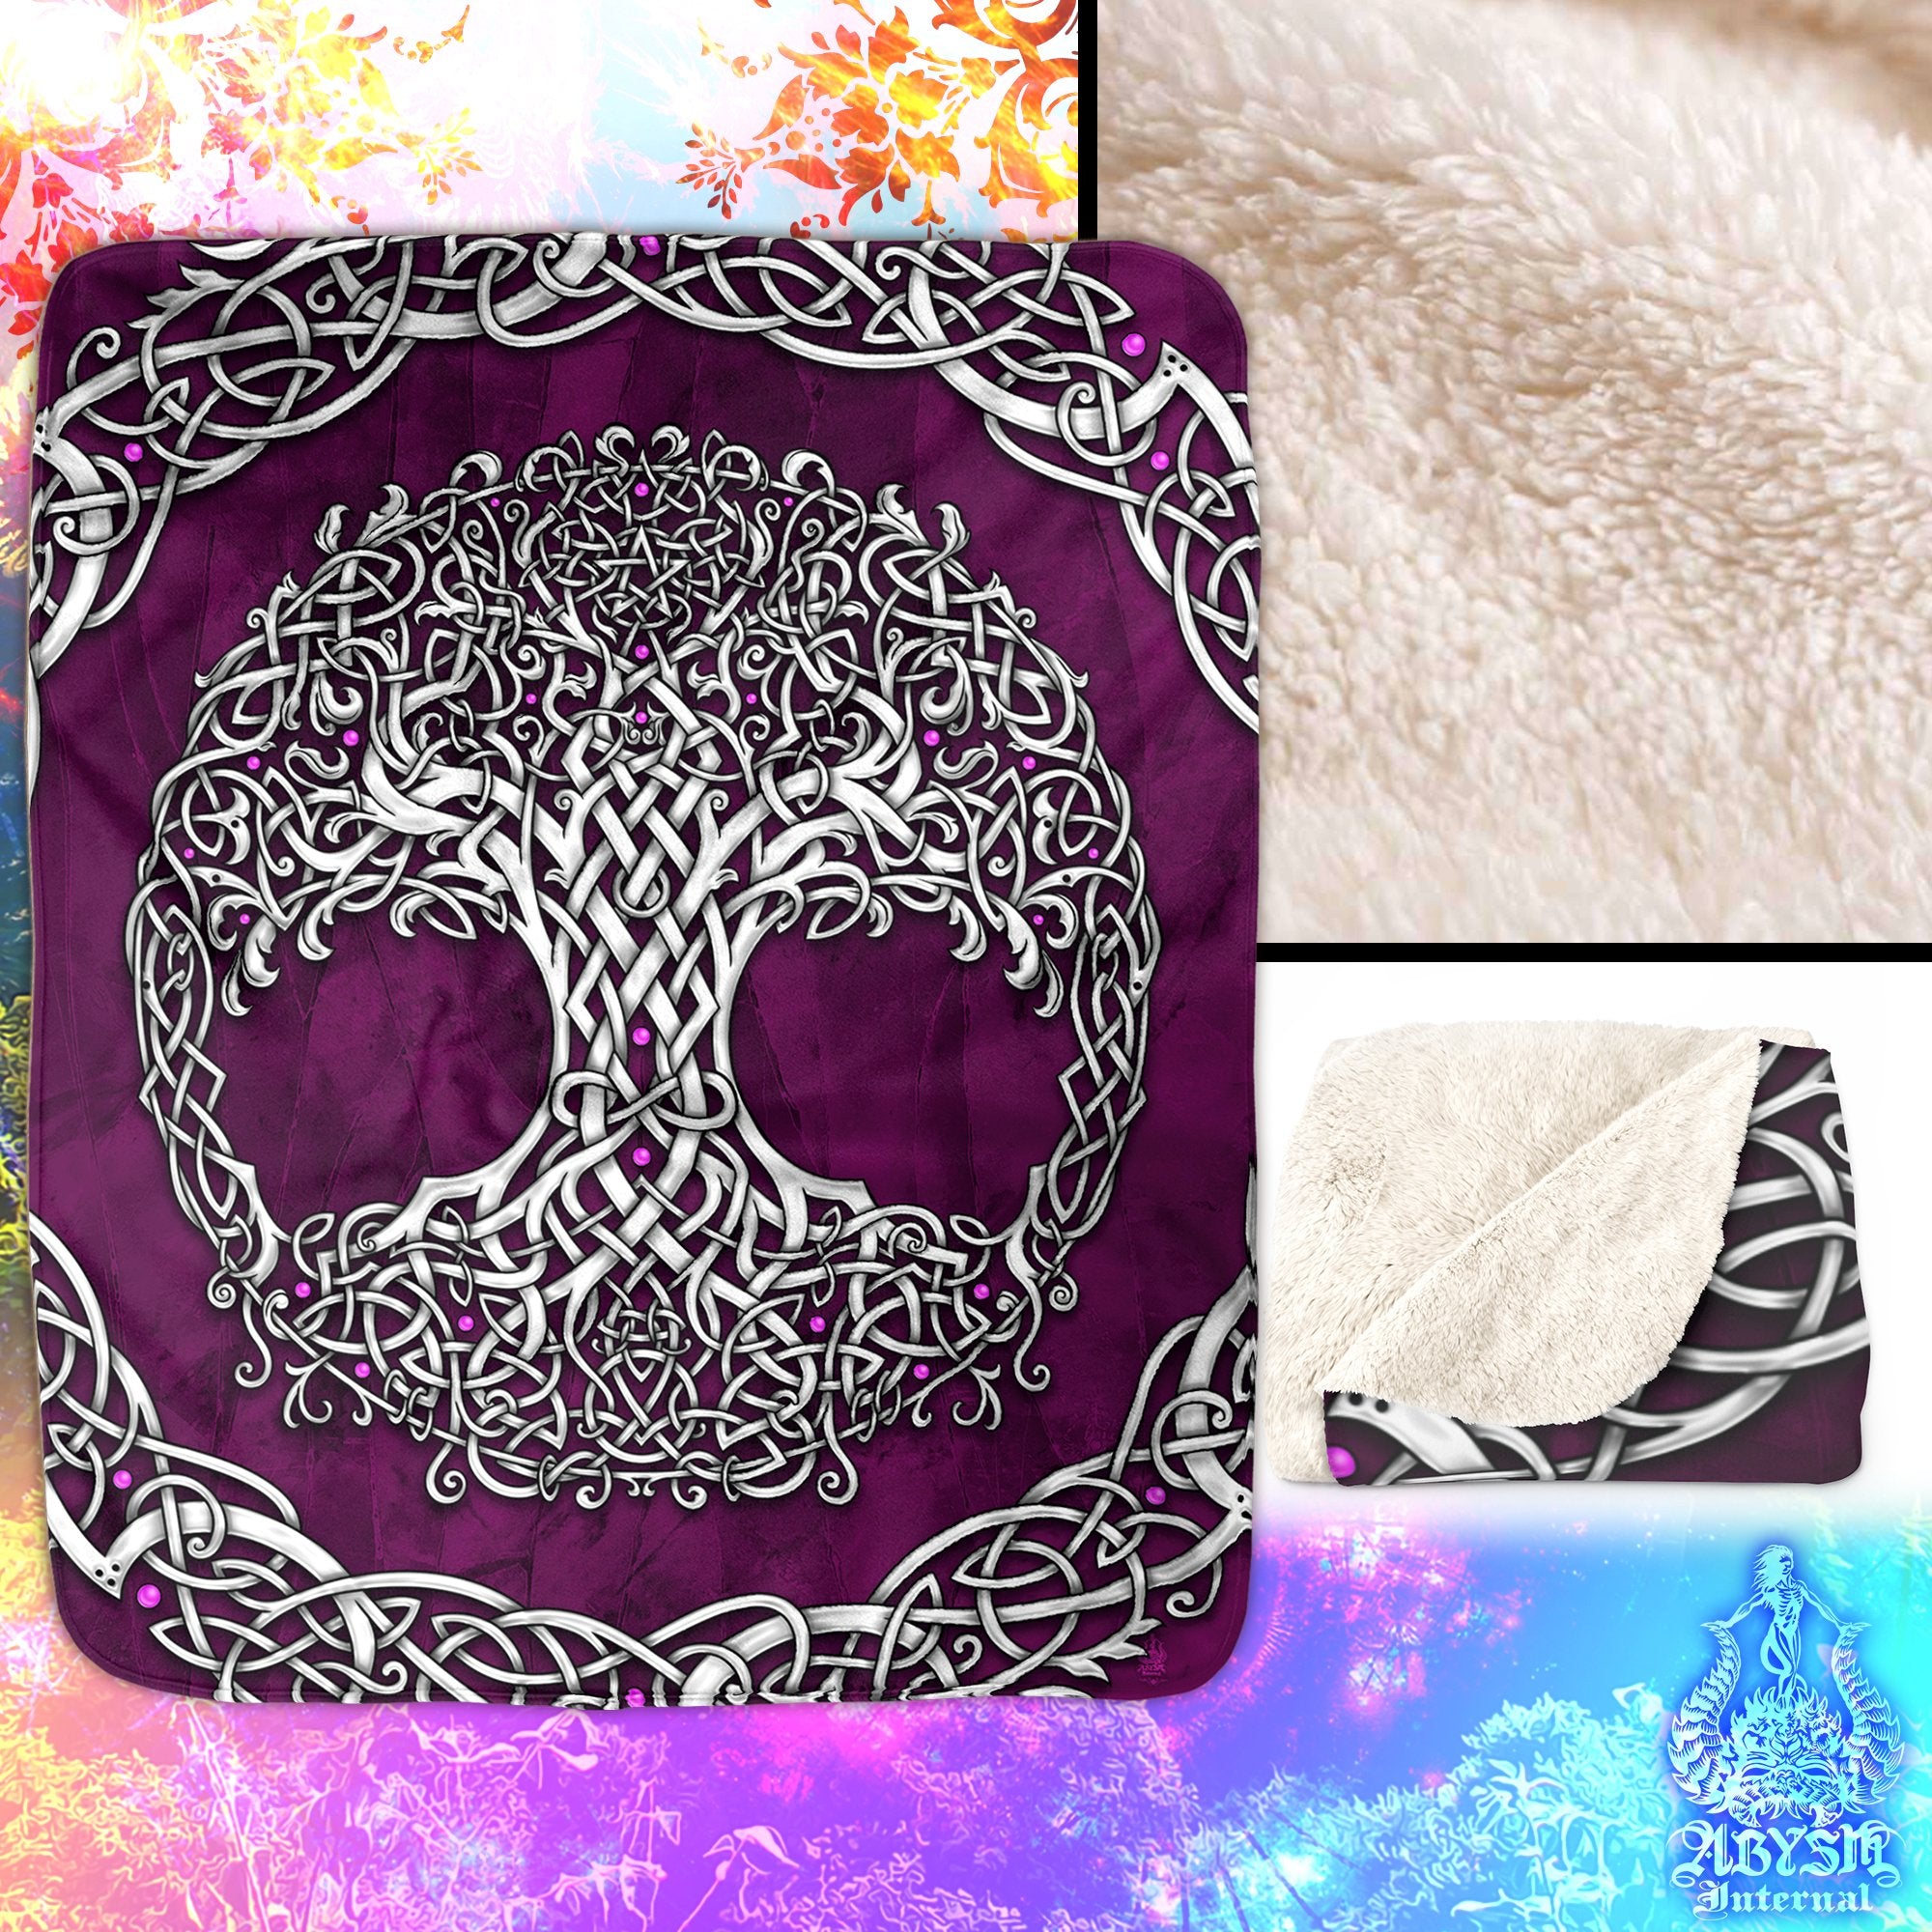 White Tree of Life Sherpa Fleece Throw Blanket, Pagan Decor, Celtic Knot, Witch Room, Wicca - Black, Purple and Green, 3 Colors - Abysm Internal